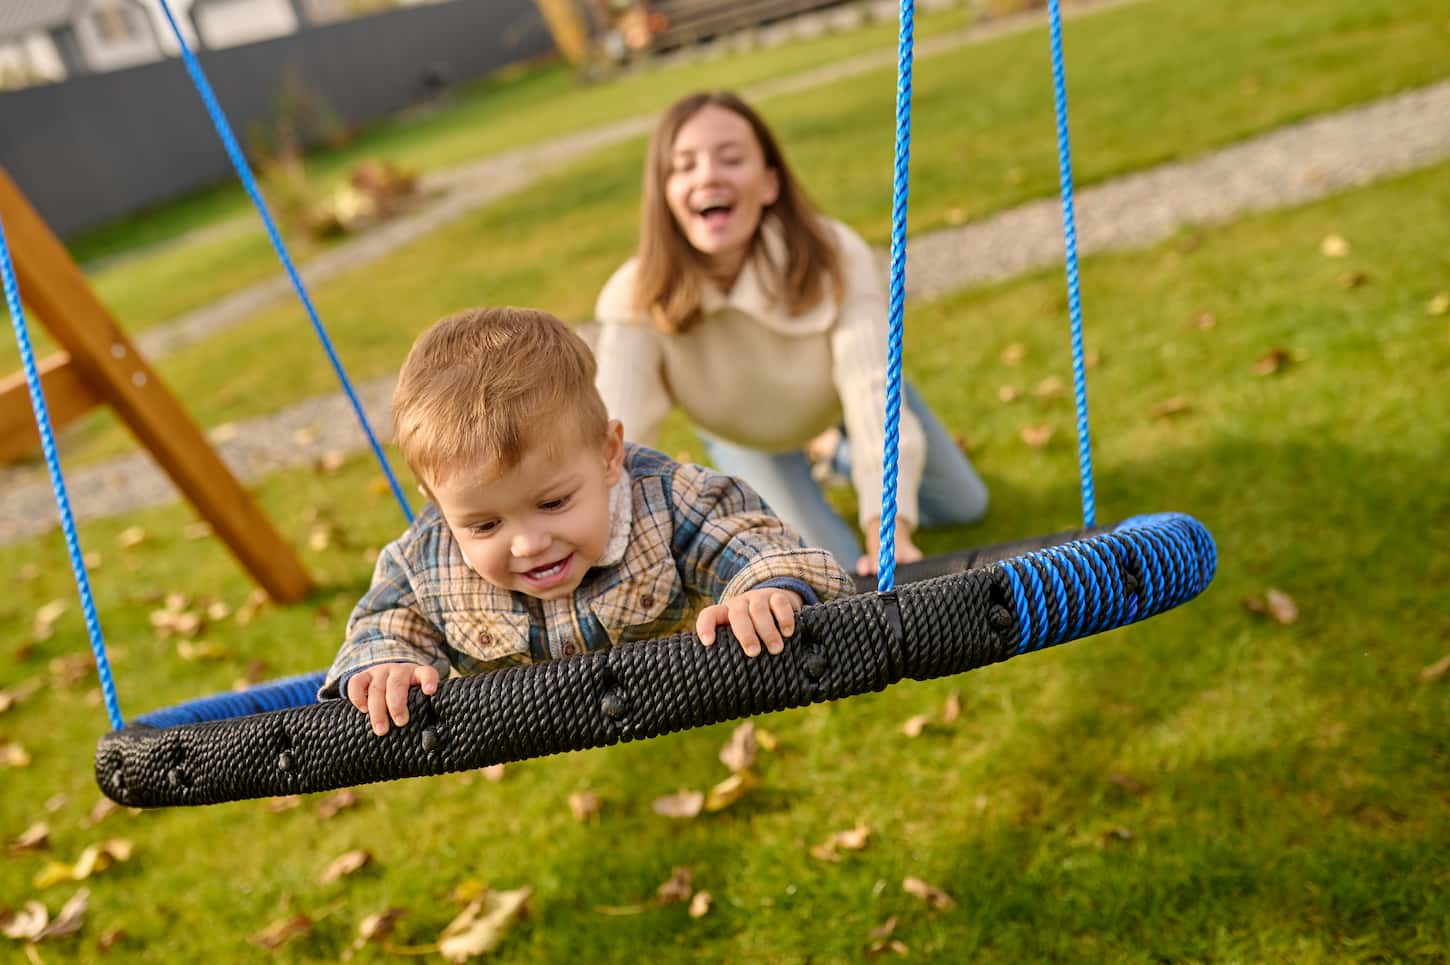 An image of a Young enthusiastic blonde woman in comfortable casual clothes kneeling pushing a swing with a joyful child on a green lawn on a sunny autumn day.